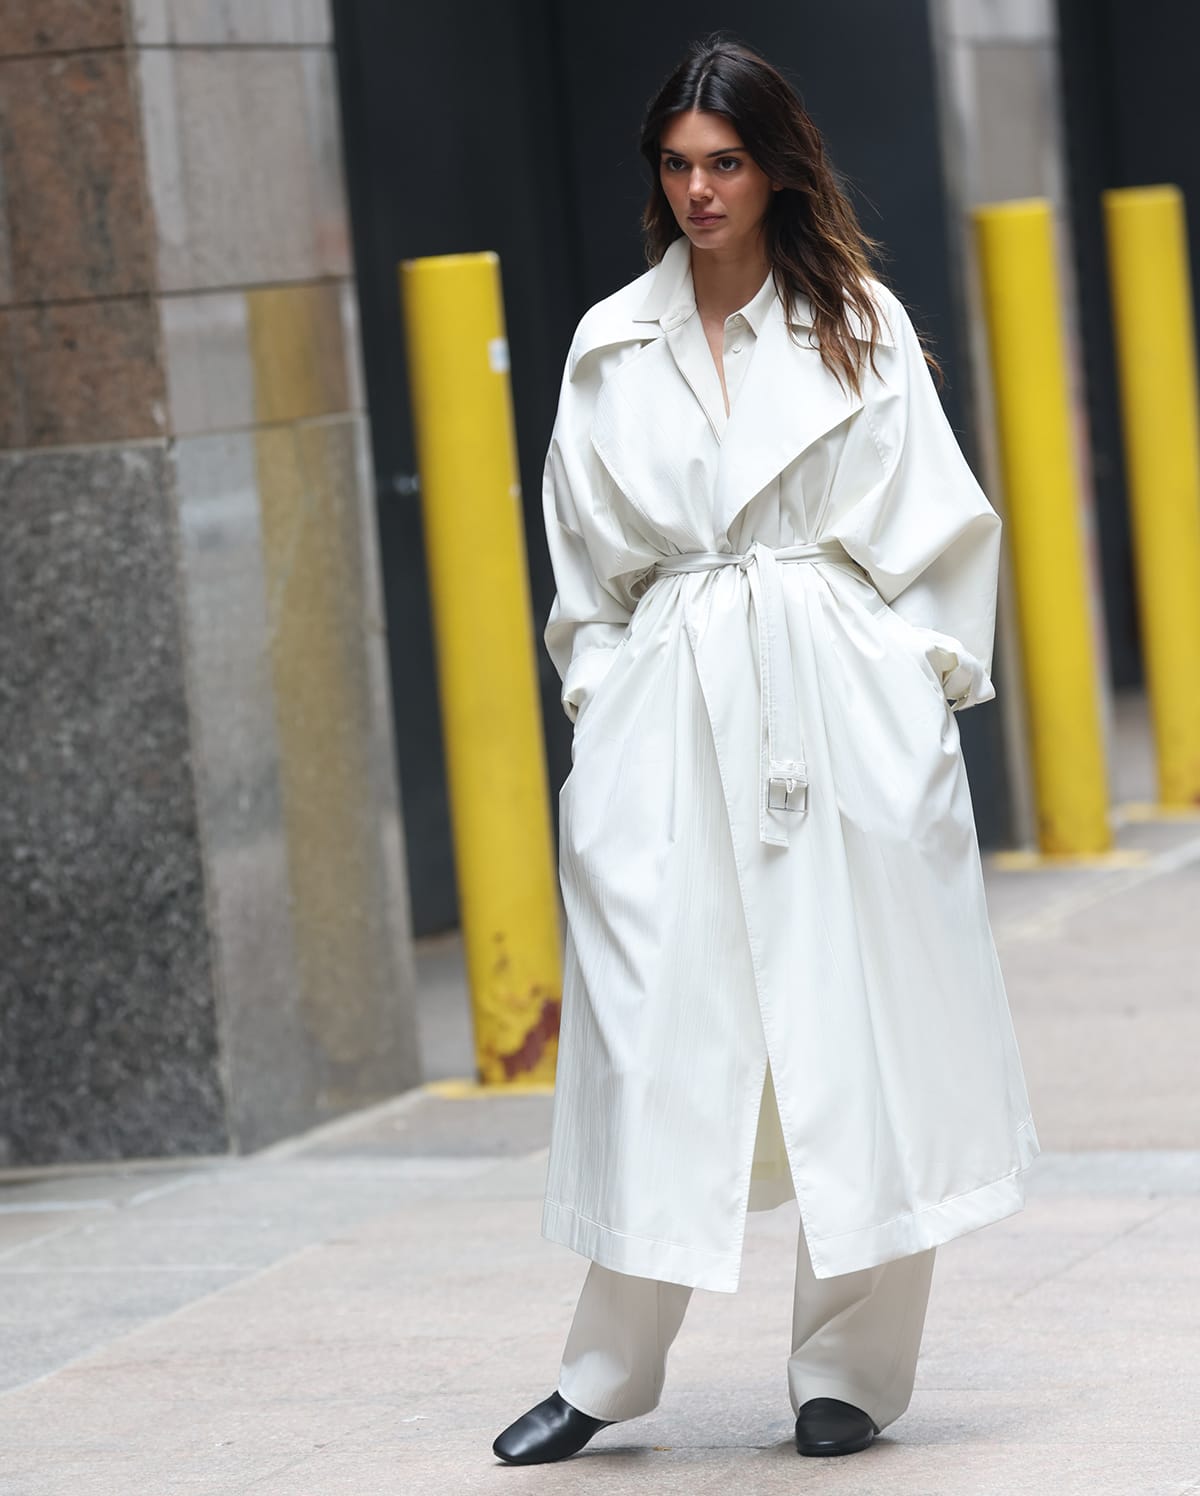 Kendall Jenner looks fresh in a white coat with a flattering tie-waist fastening at the front